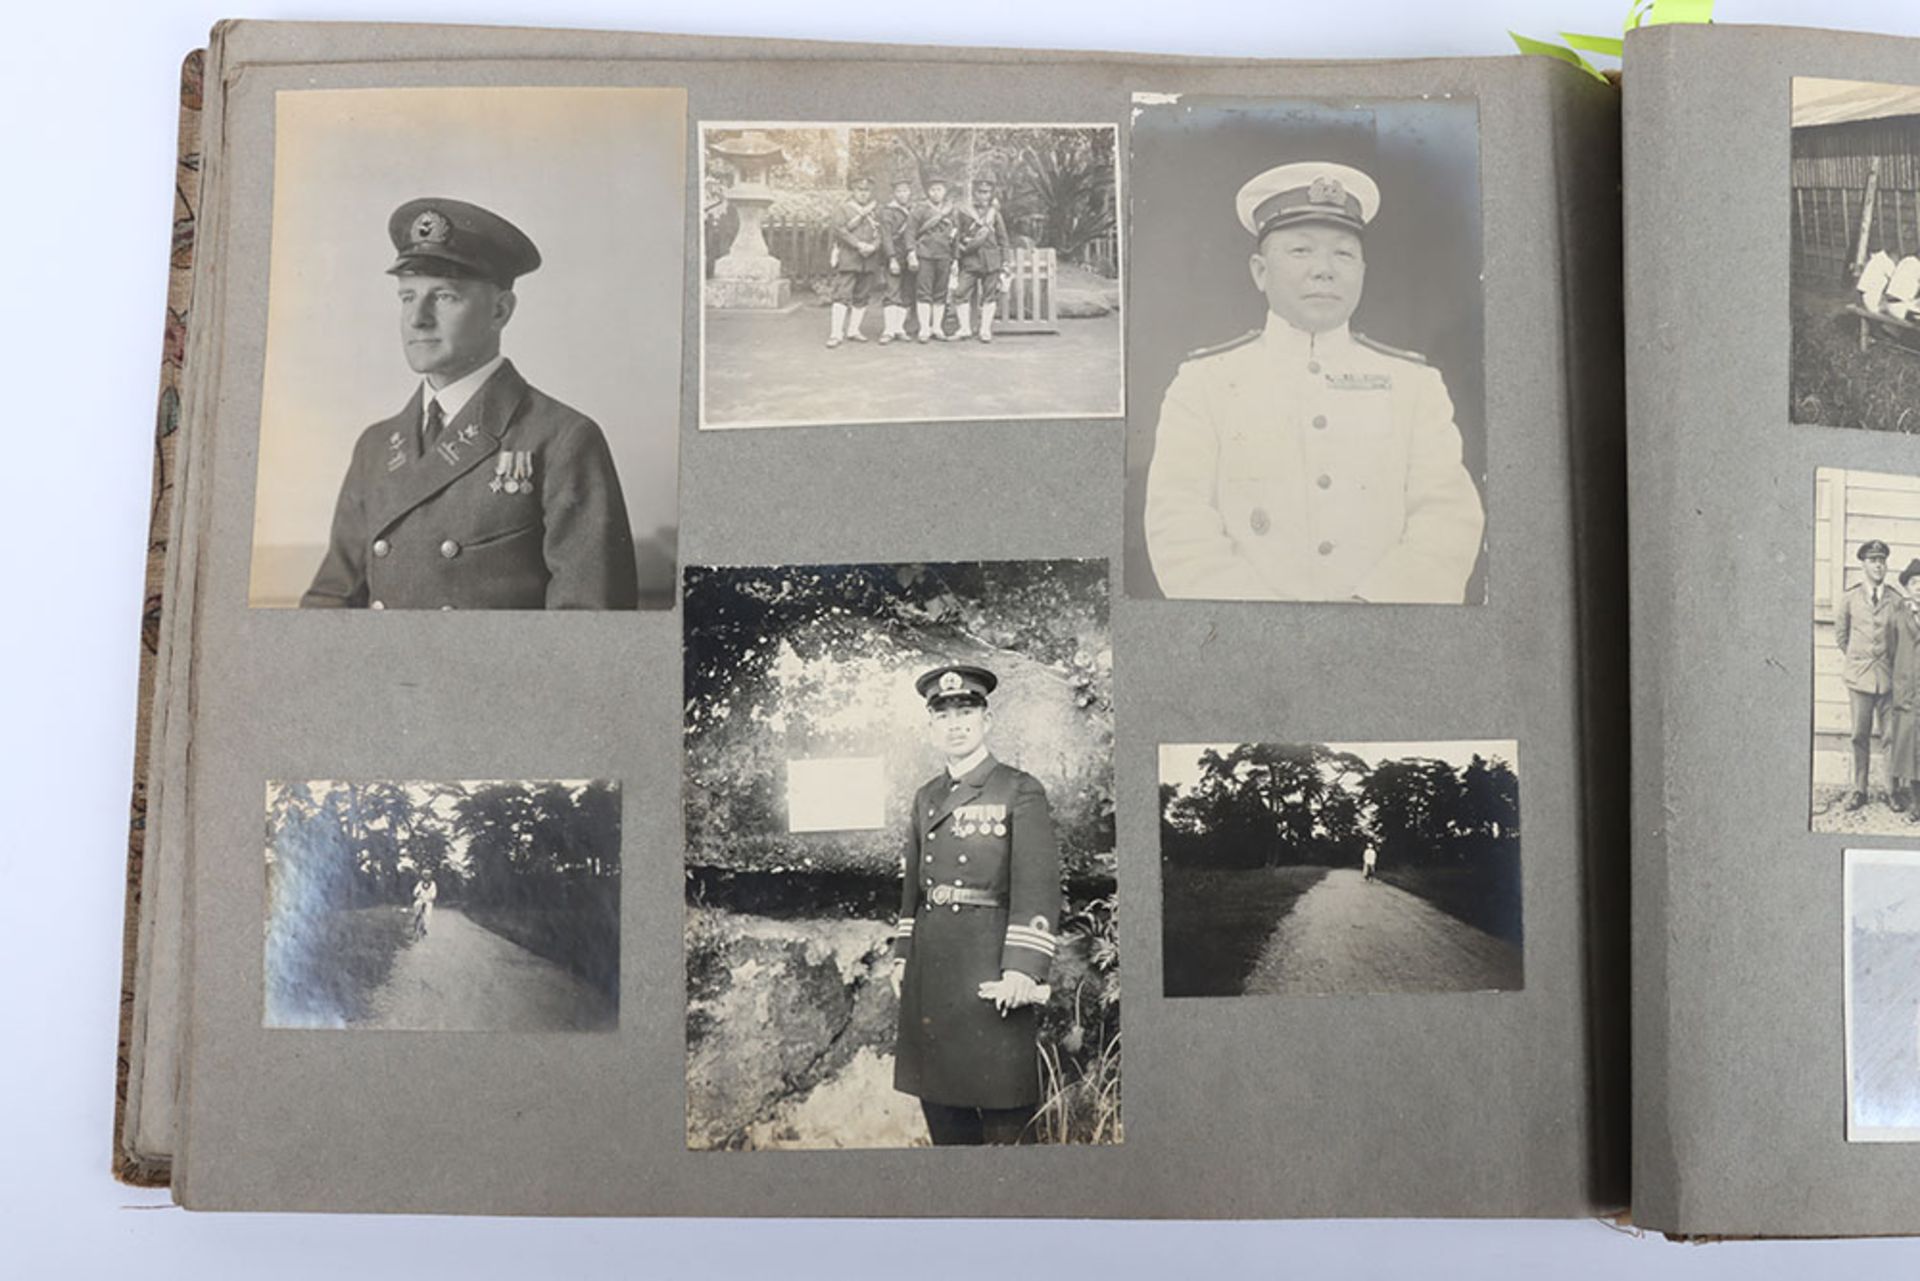 Historically Interesting Photograph Album Compiled by a Member of the Naval Aviation Station at Kasu - Image 31 of 47